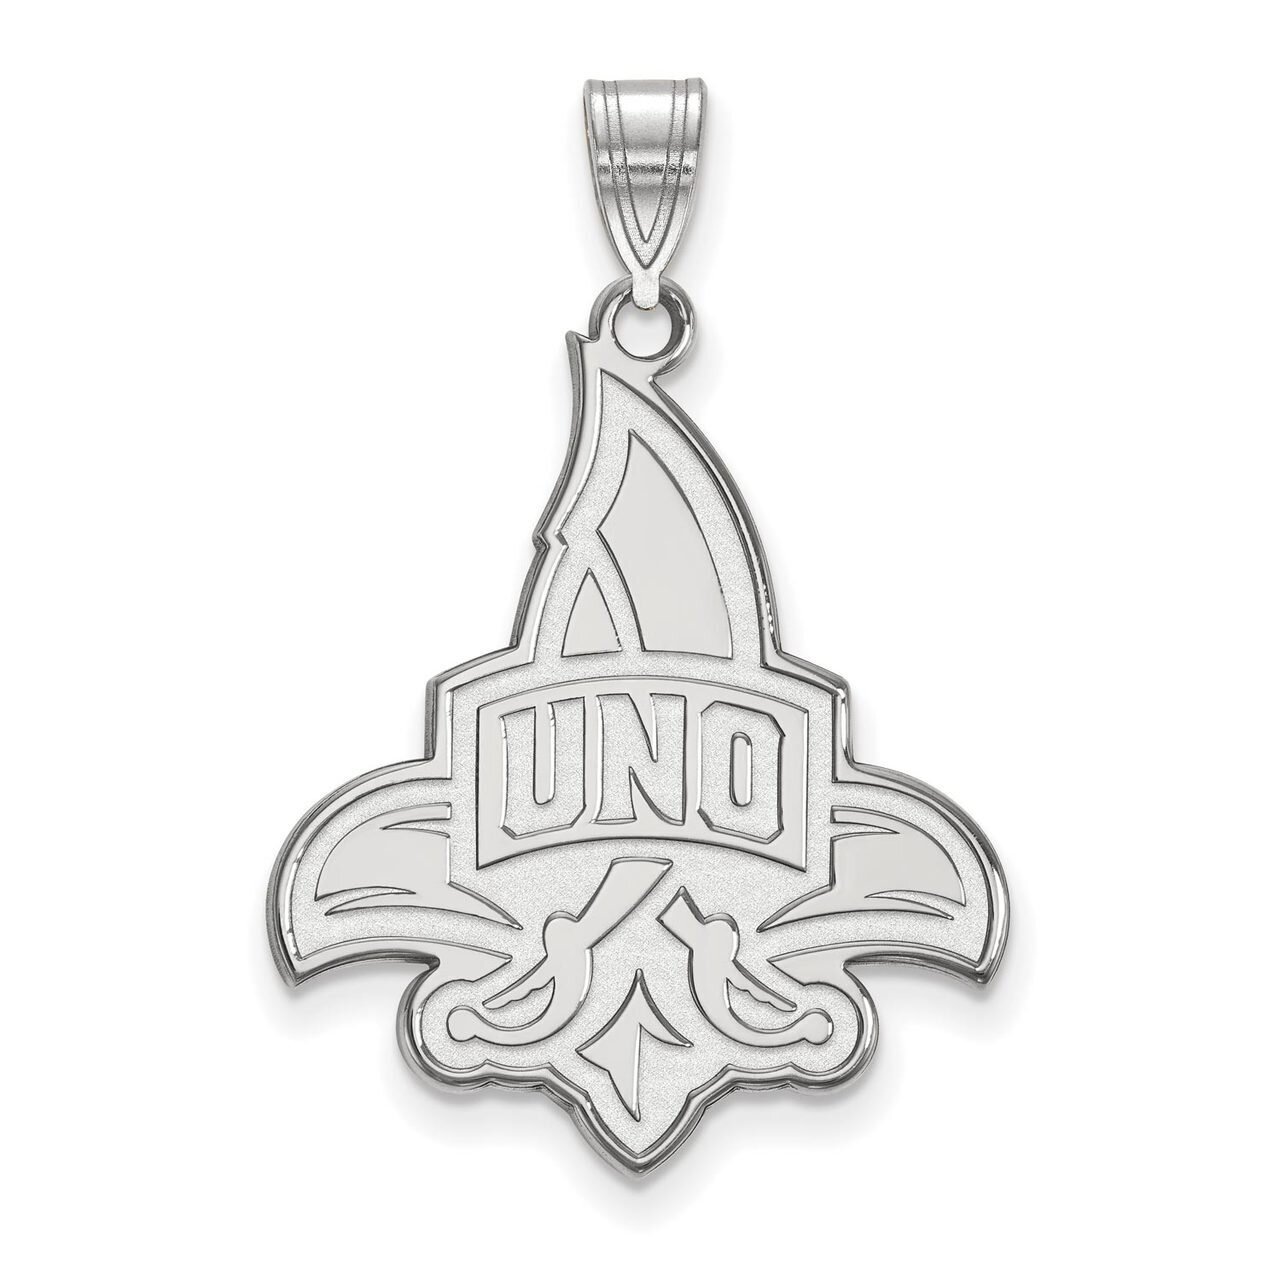 University of New Orleans x-Large Pendant 14k White Gold 4W004UNO